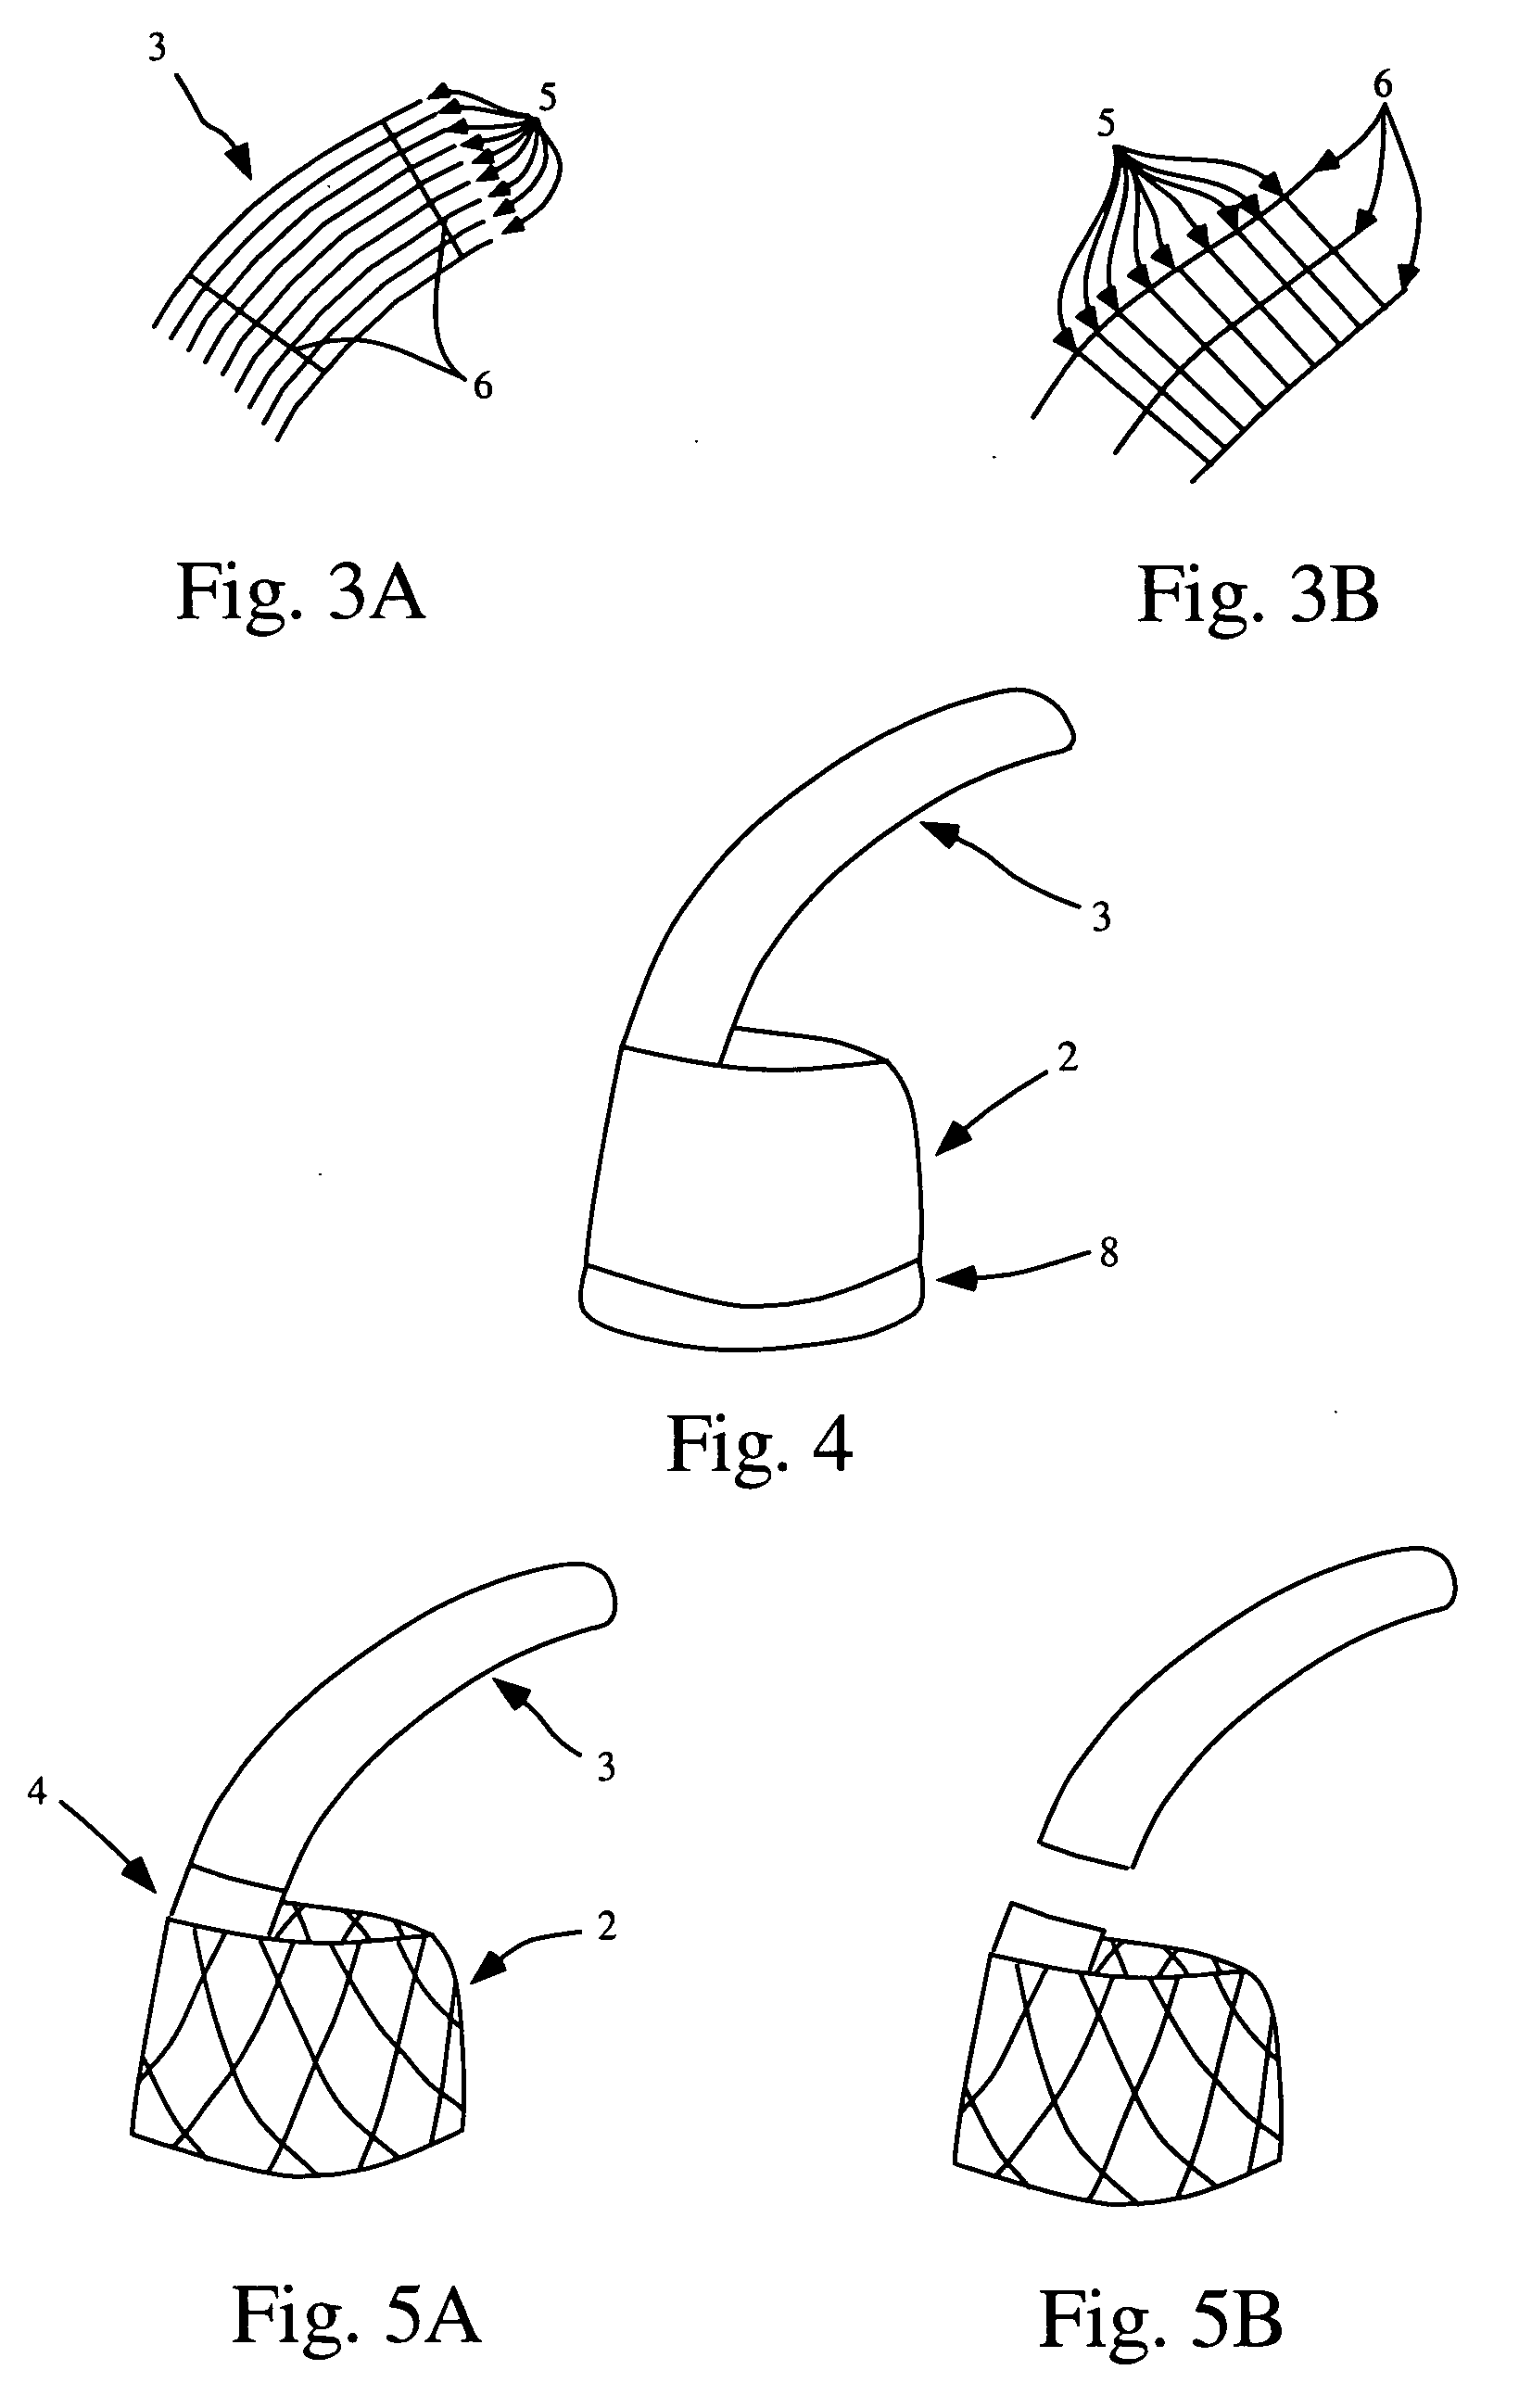 Embolic protection device for the prevention of stroke